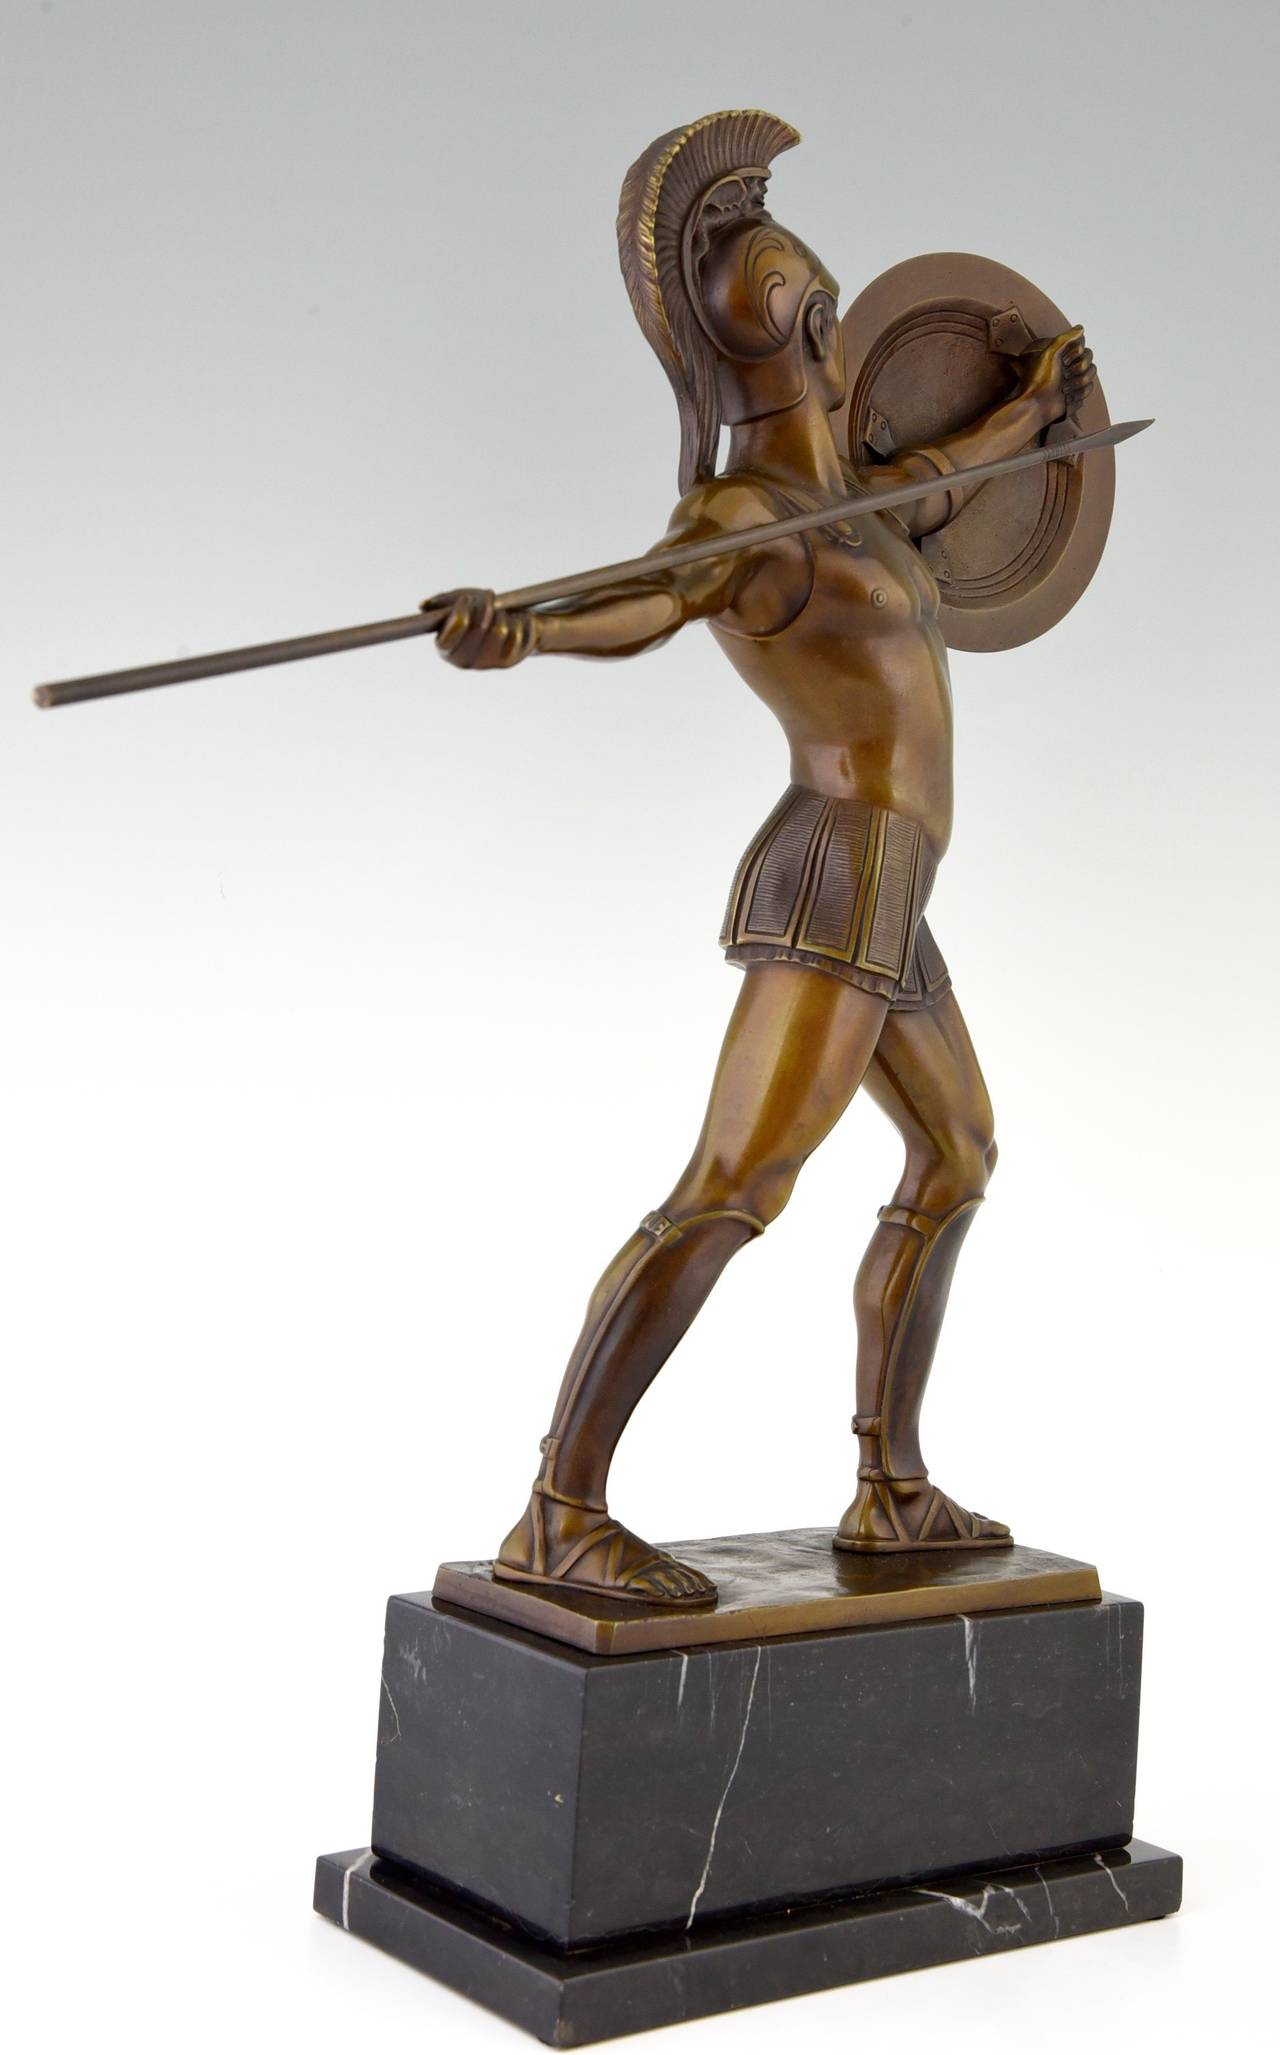 20th Century Antique Bronze Sculpture of a Roman Warrior by H. Rieder, Germany 1920